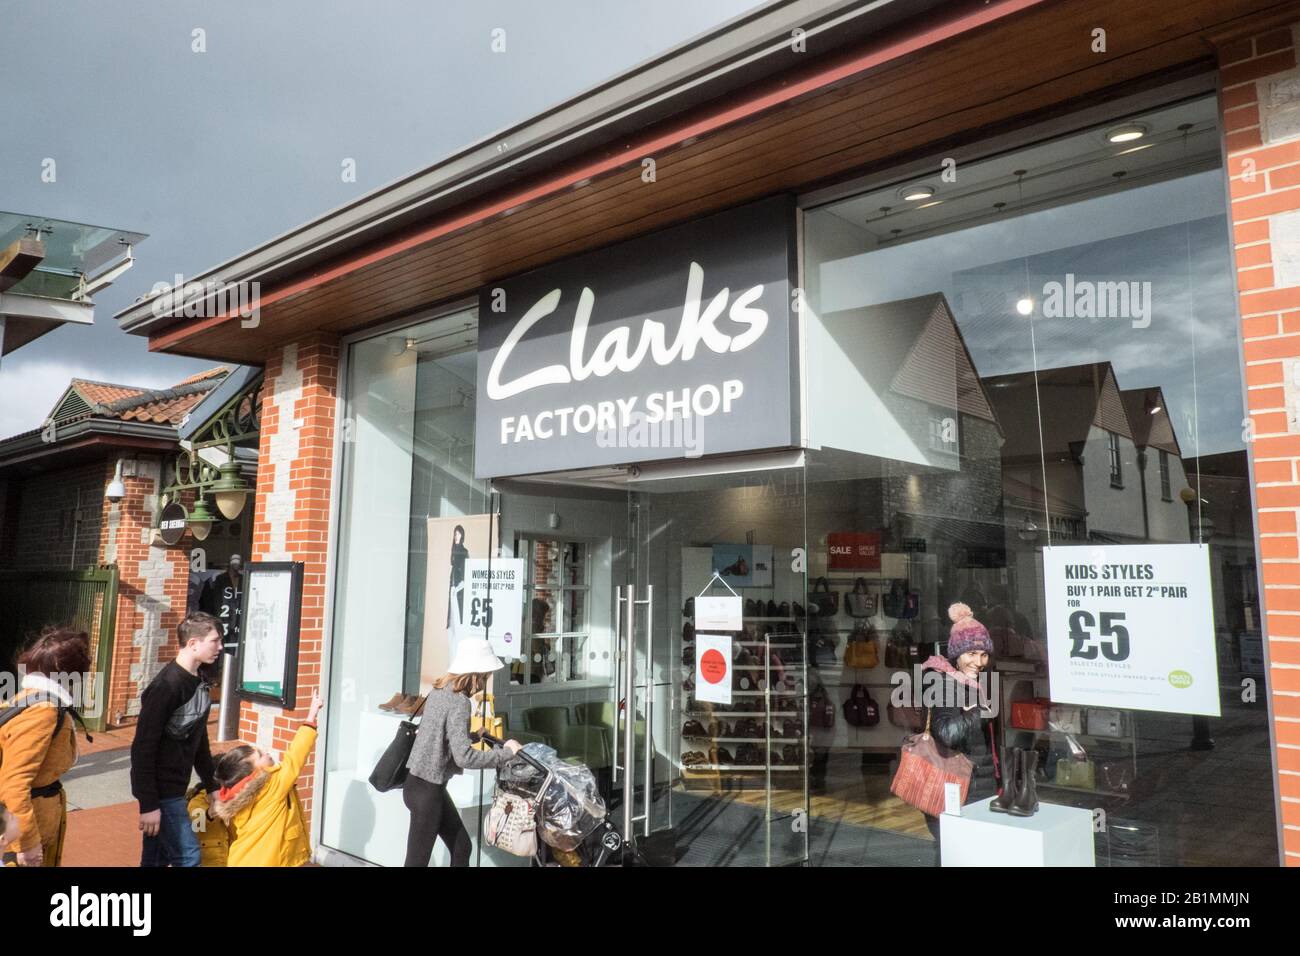 clarks factory shop blackpool off 73 